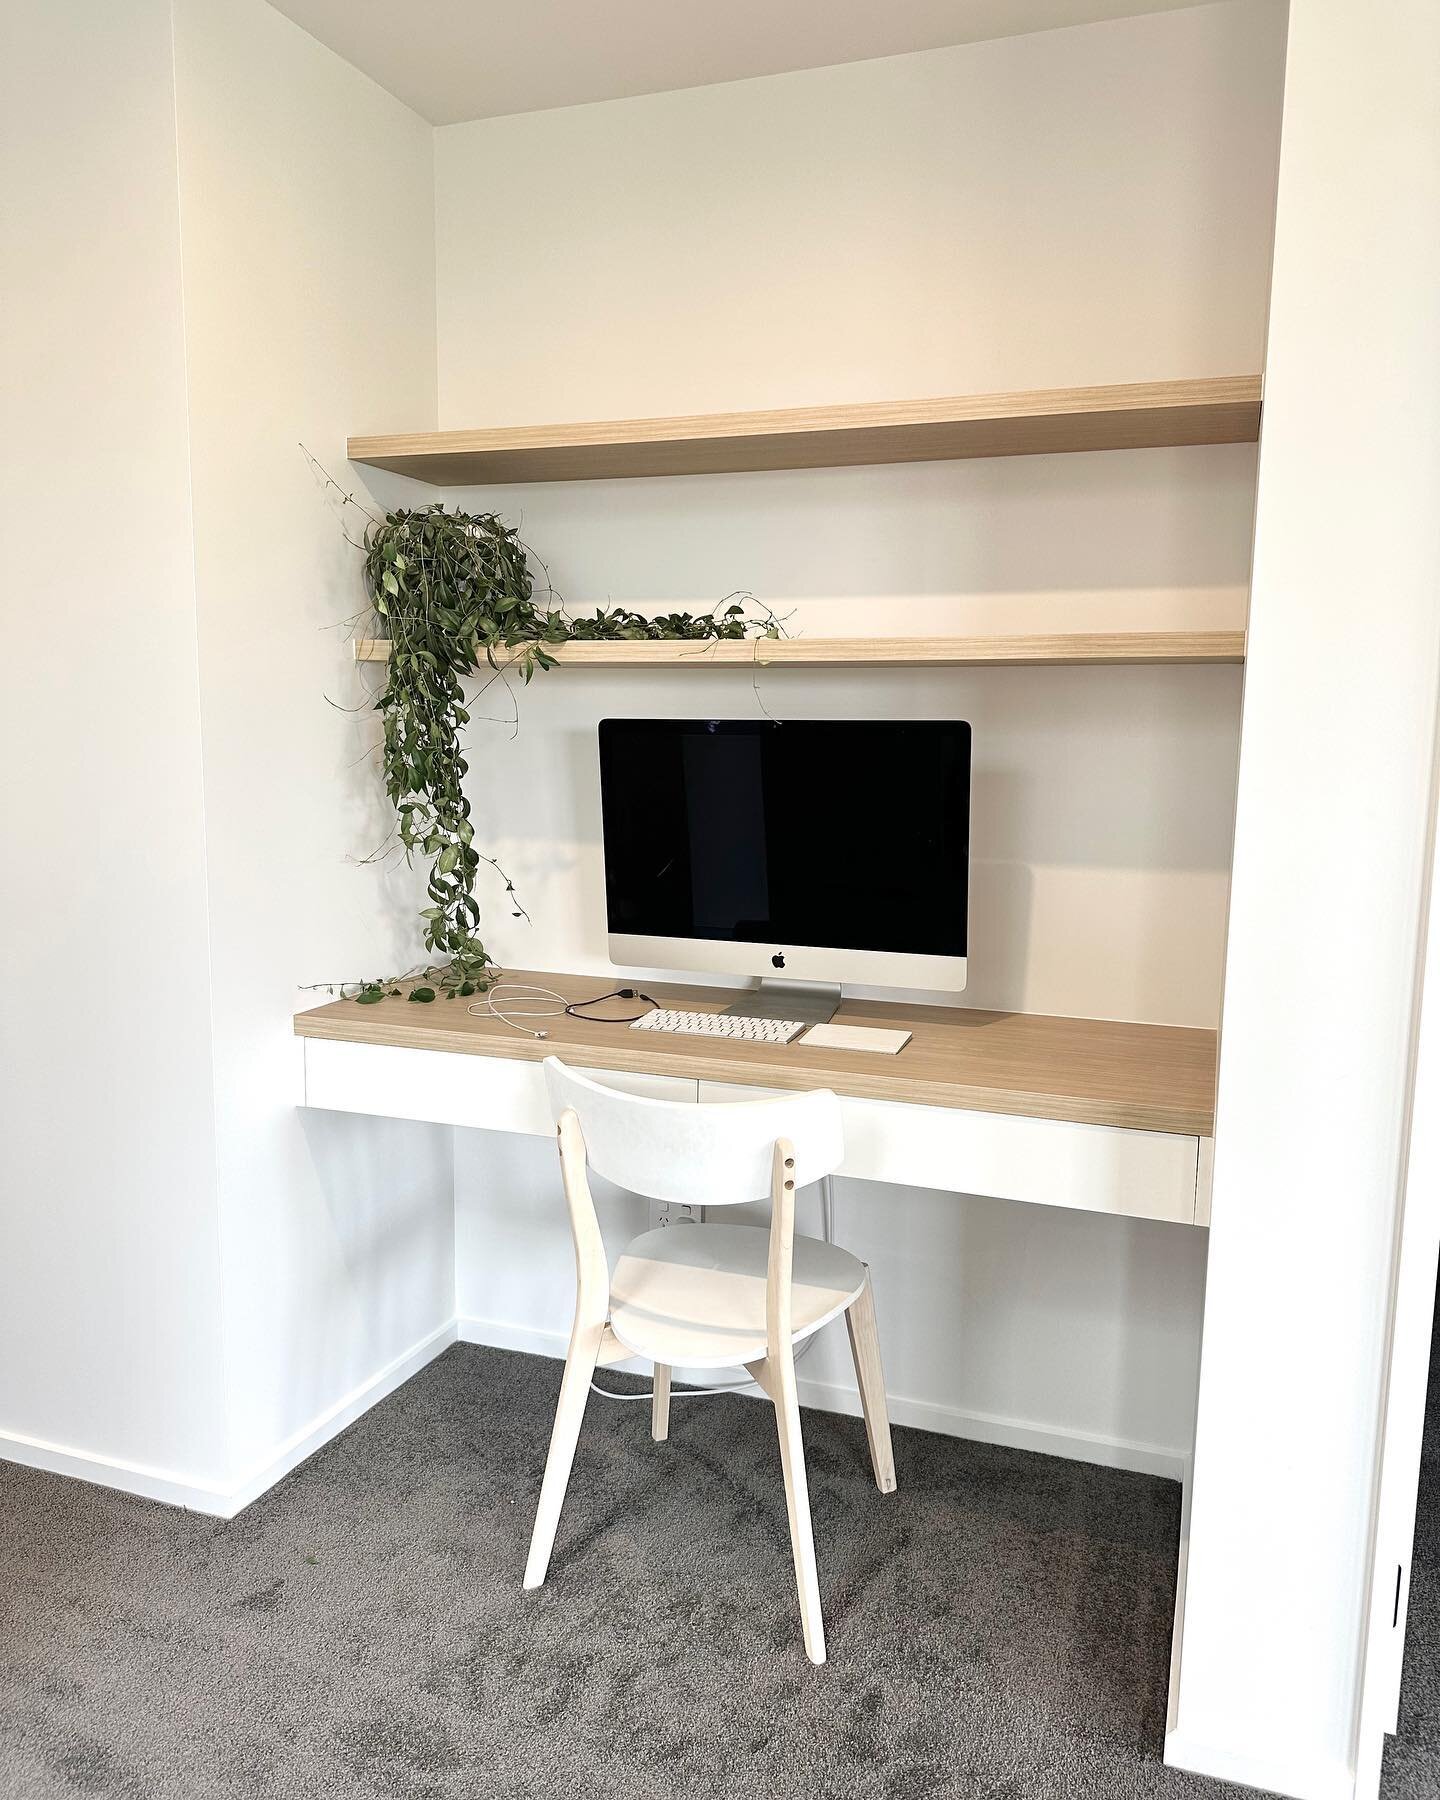 A simple and functional way to maximize small spaces. 

#studynook #studynookdesign #homeofficeideas #cubestudionz